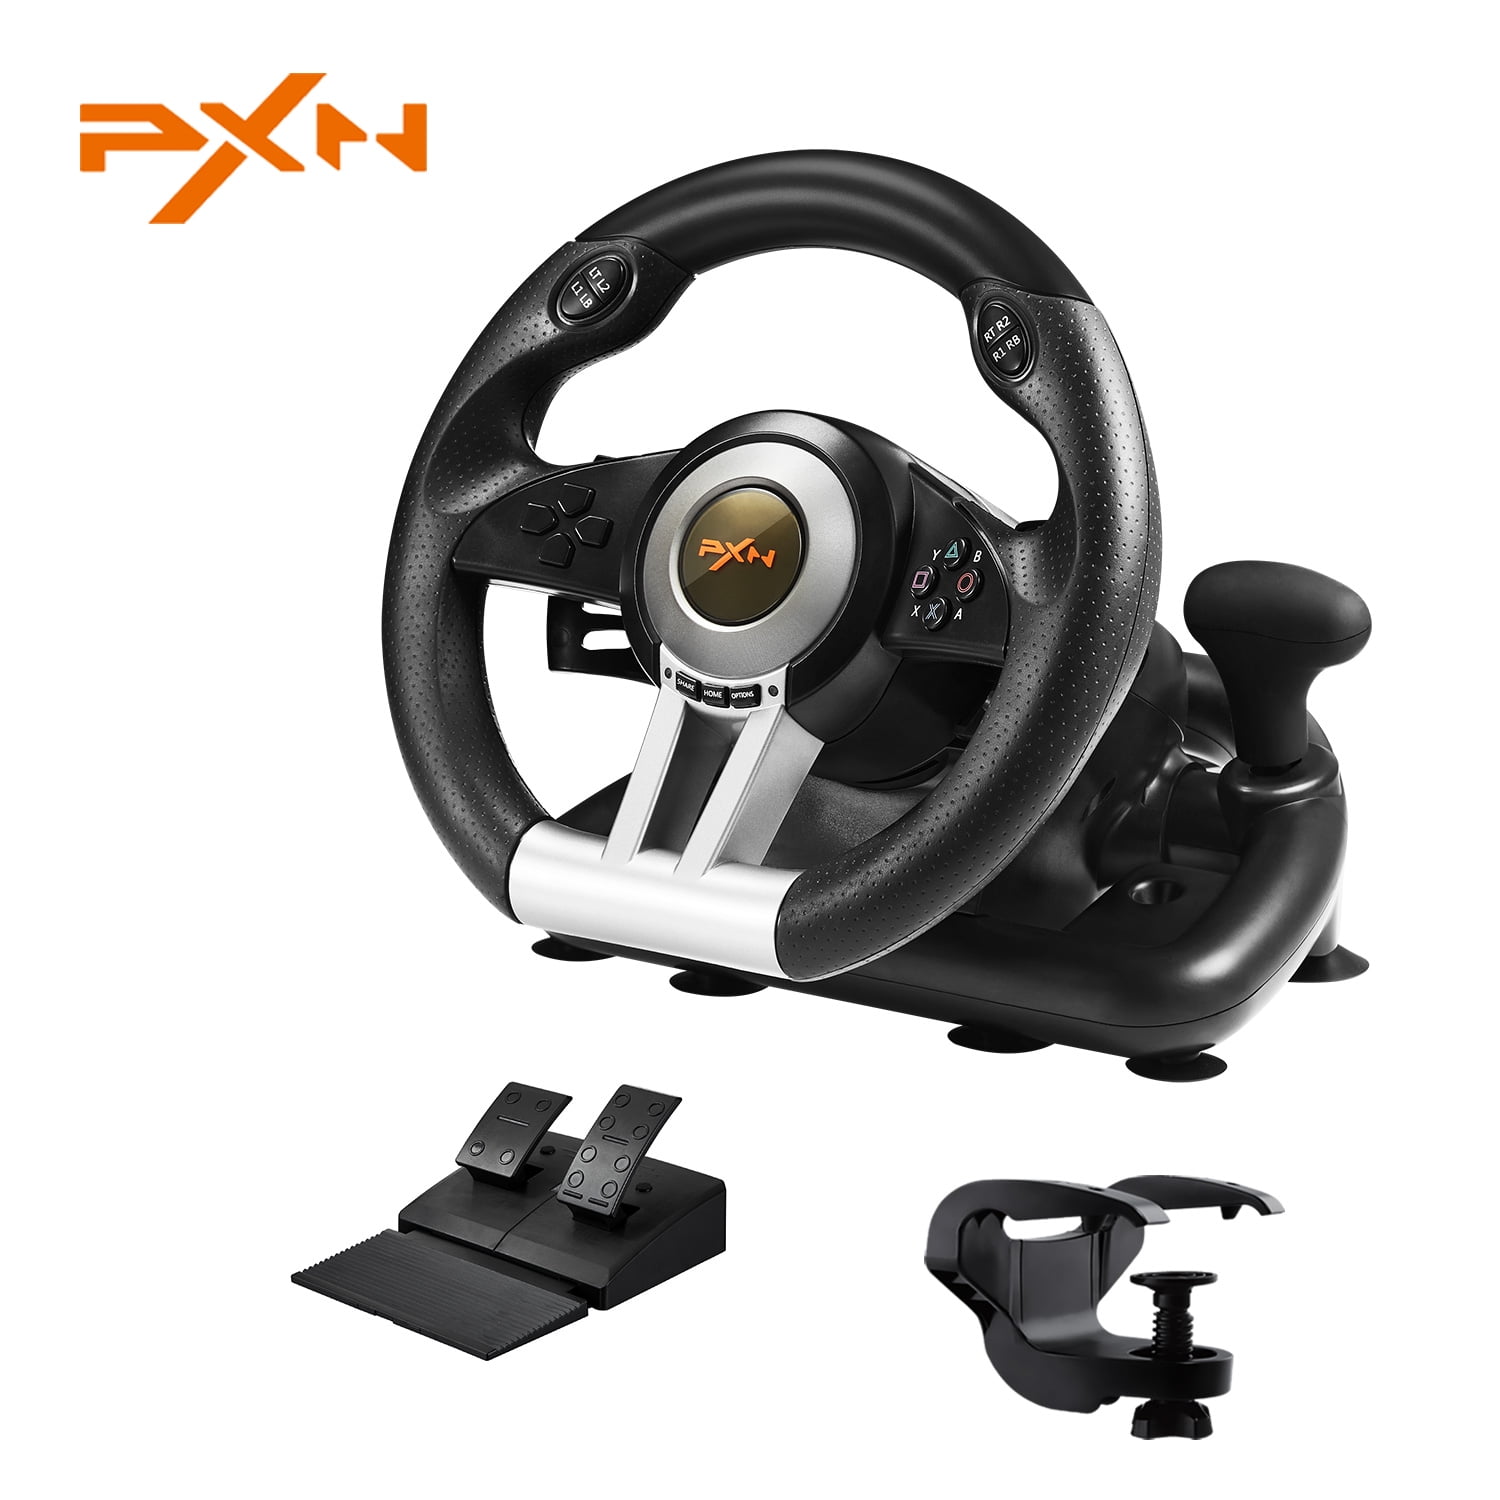 Imperialisme Legitim Celsius Xbox Steering Wheel - PXN V3II 180° Gaming Racing Wheel Driving Wheel, with  Linear Pedals and Racing Paddles for Xbox Series X|S, PC, PS4, Xbox One,  Nintendo Switch - Black - Walmart.com